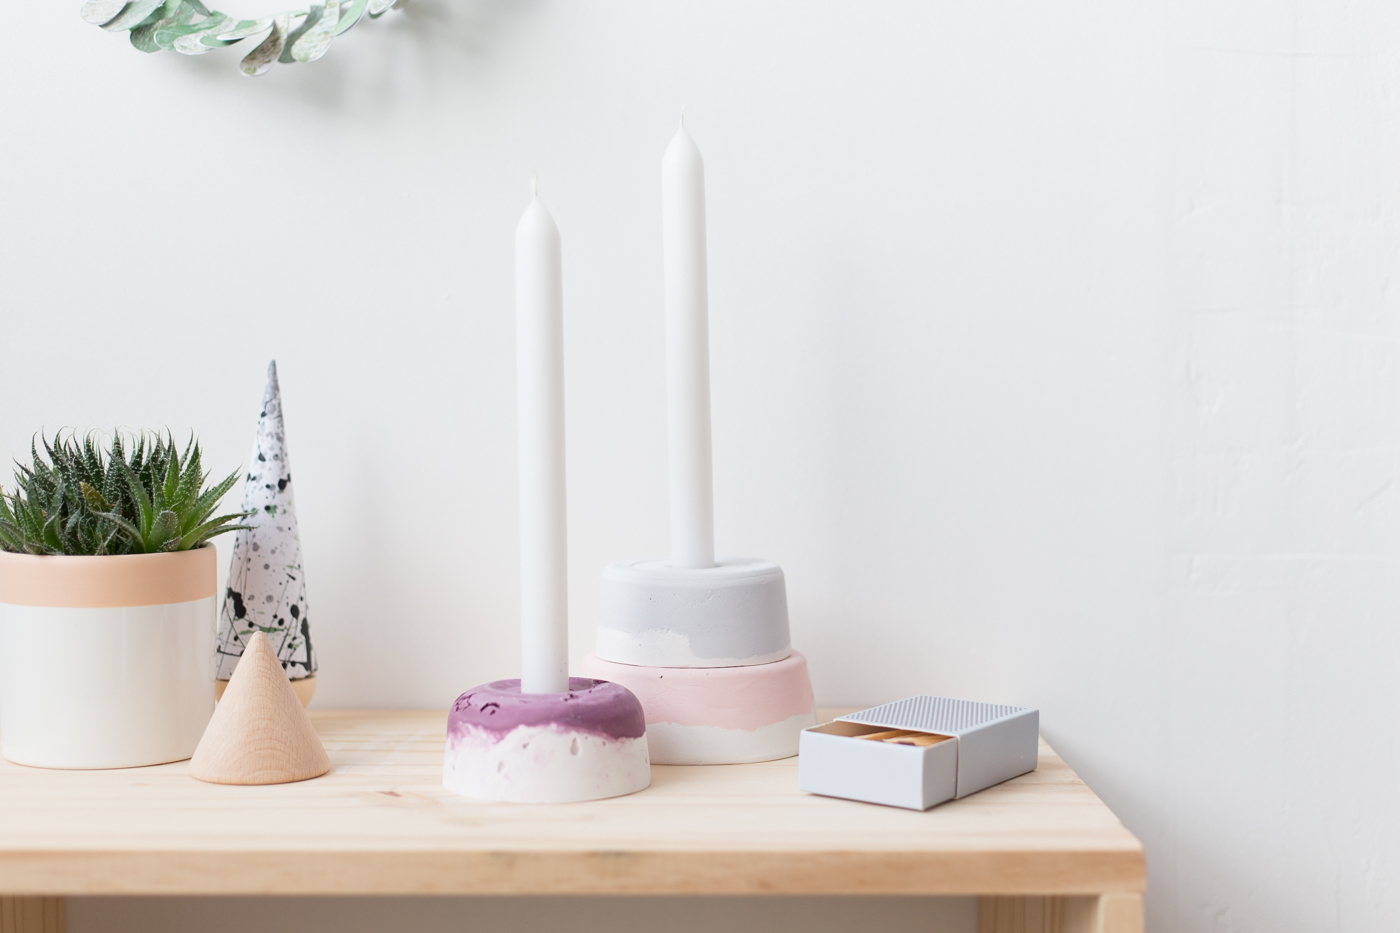 DIY Paint Dyed Plaster Candle Holder